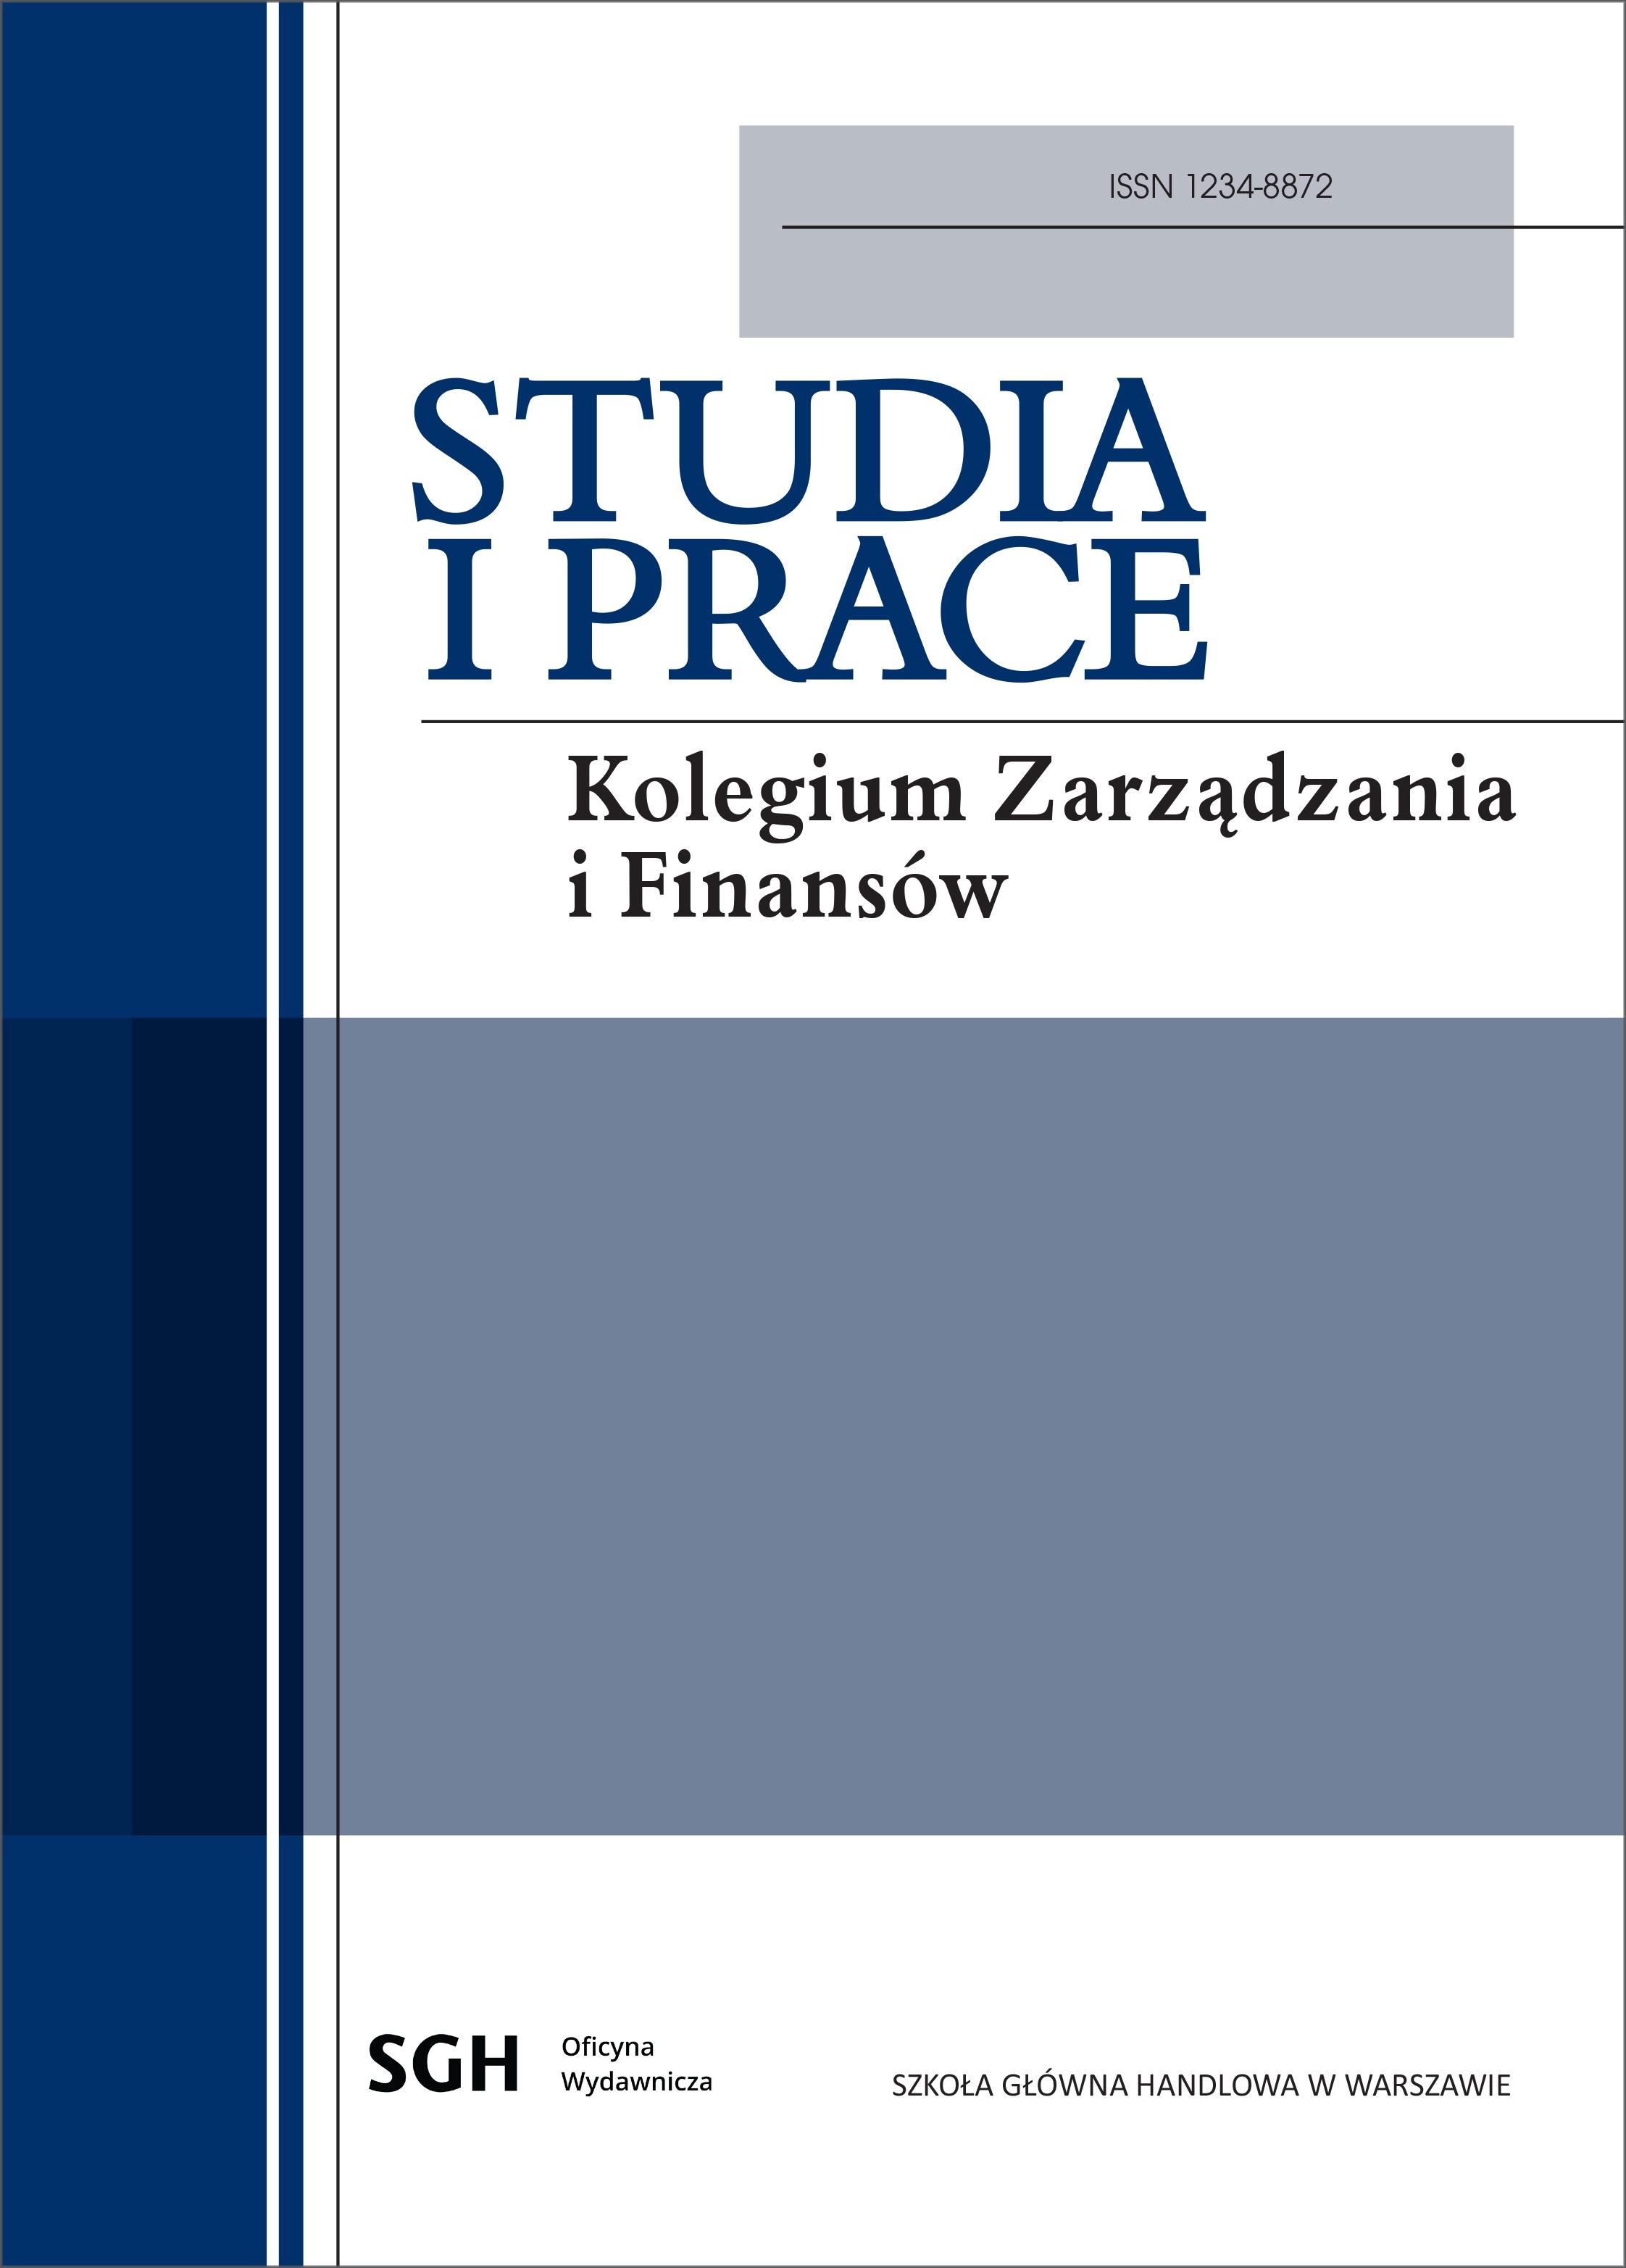 The Structure of Innovation Portfolio of Large Enterprises in Poland Before and During the Global Pandemic Cover Image